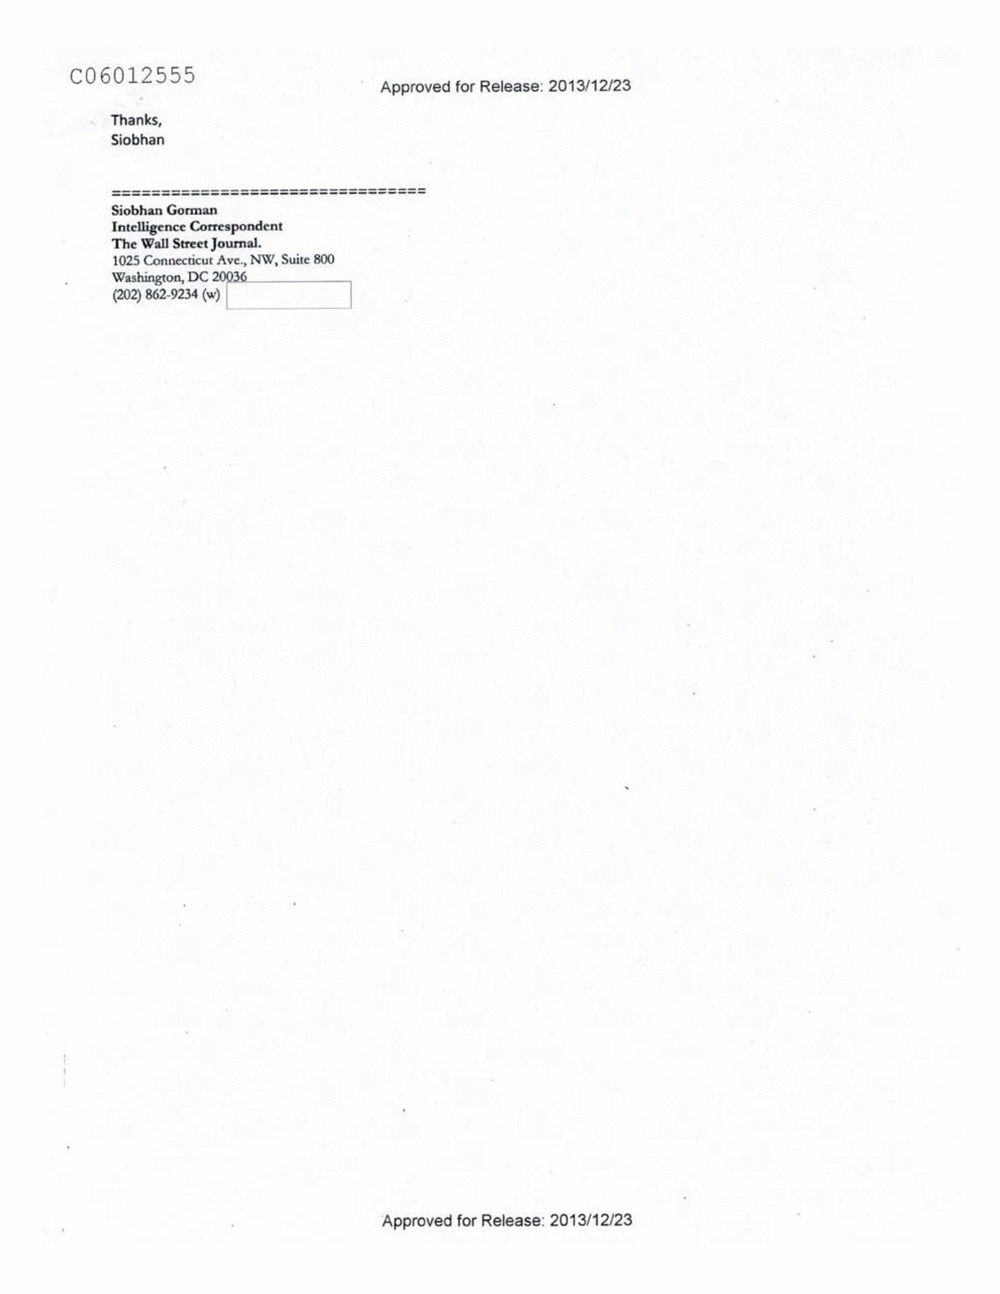 Page 155 from Email Correspondence Between Reporters and CIA Flacks